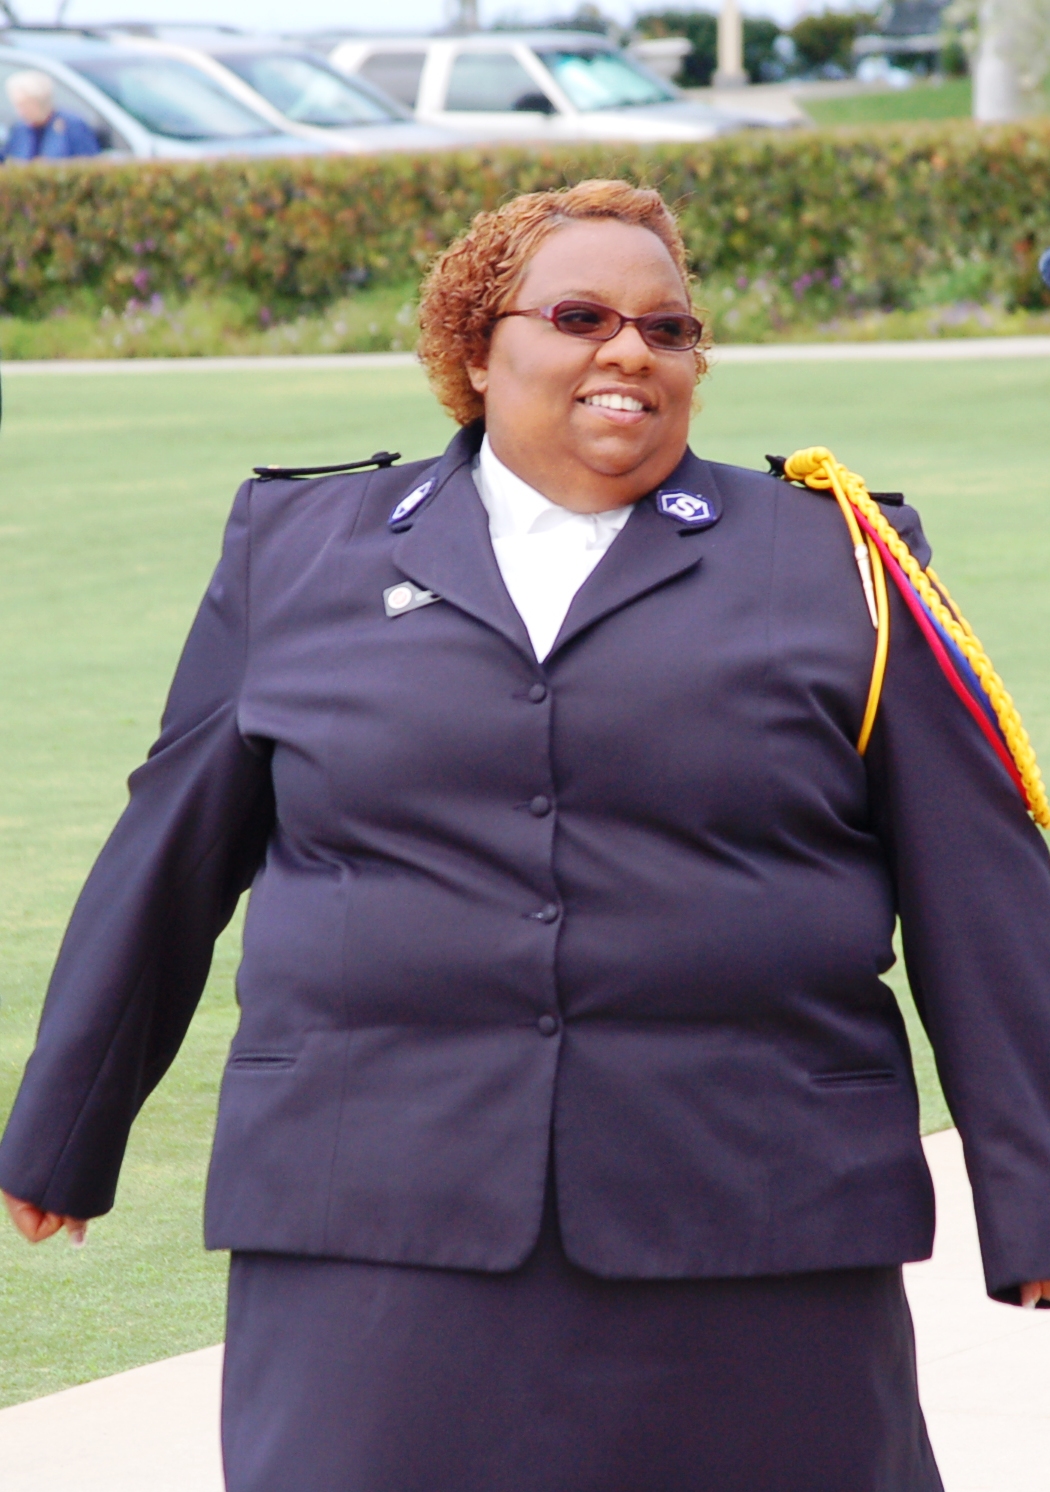 woman in black suit with white collar and sunglasses